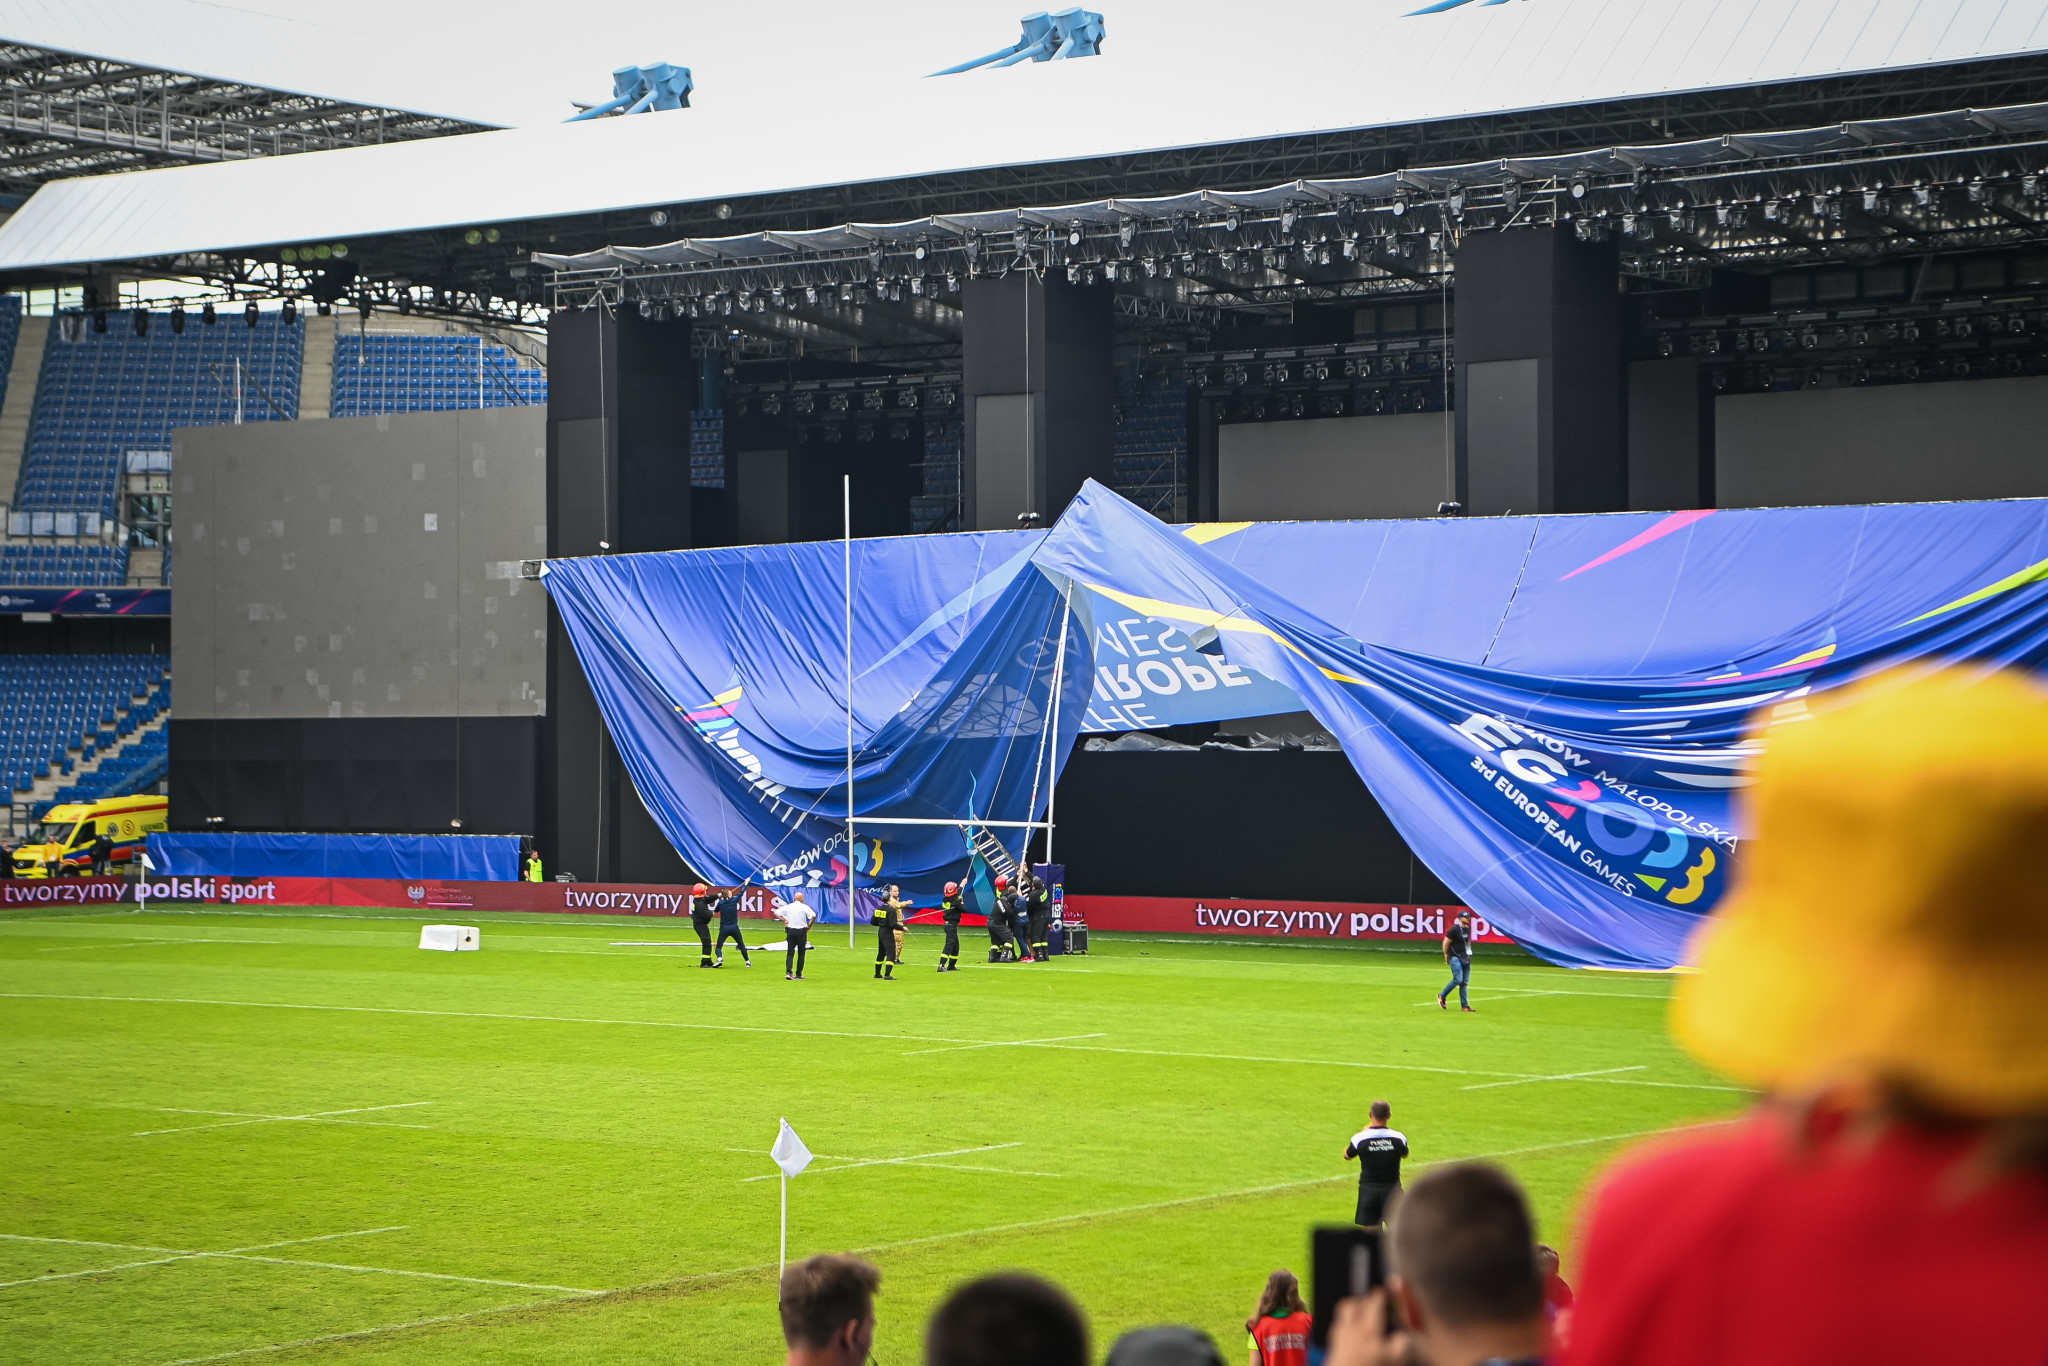 There were remarkable scenes as play in the rugby sevens was delayed by an hour when the goalposts became tangled with the tarpaulin in the wind ©Kraków-Małopolska 2023 